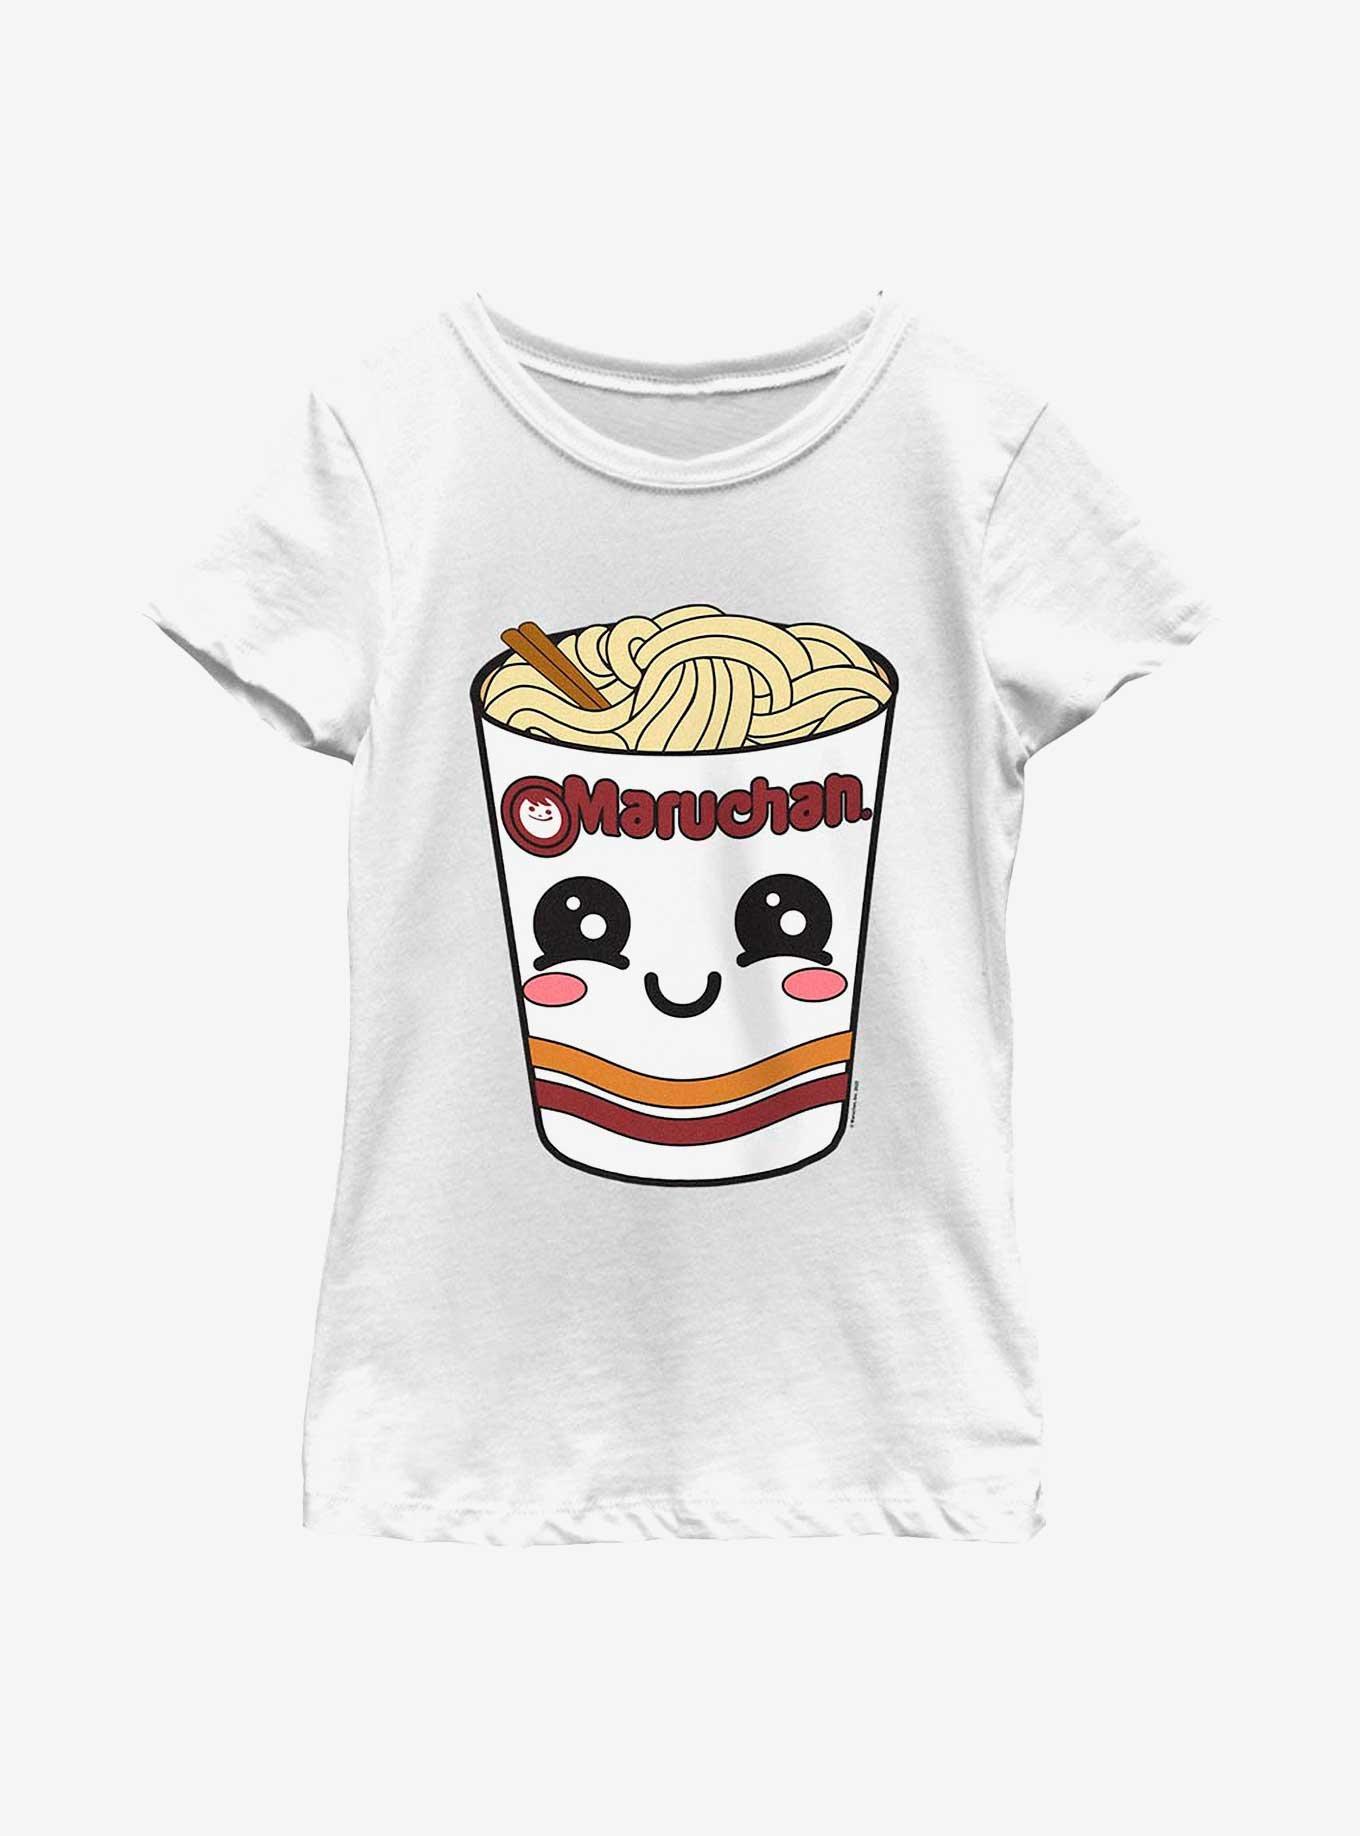 Maruchan Face Cup-8 Youth Girls T-Shirt, WHITE, hi-res